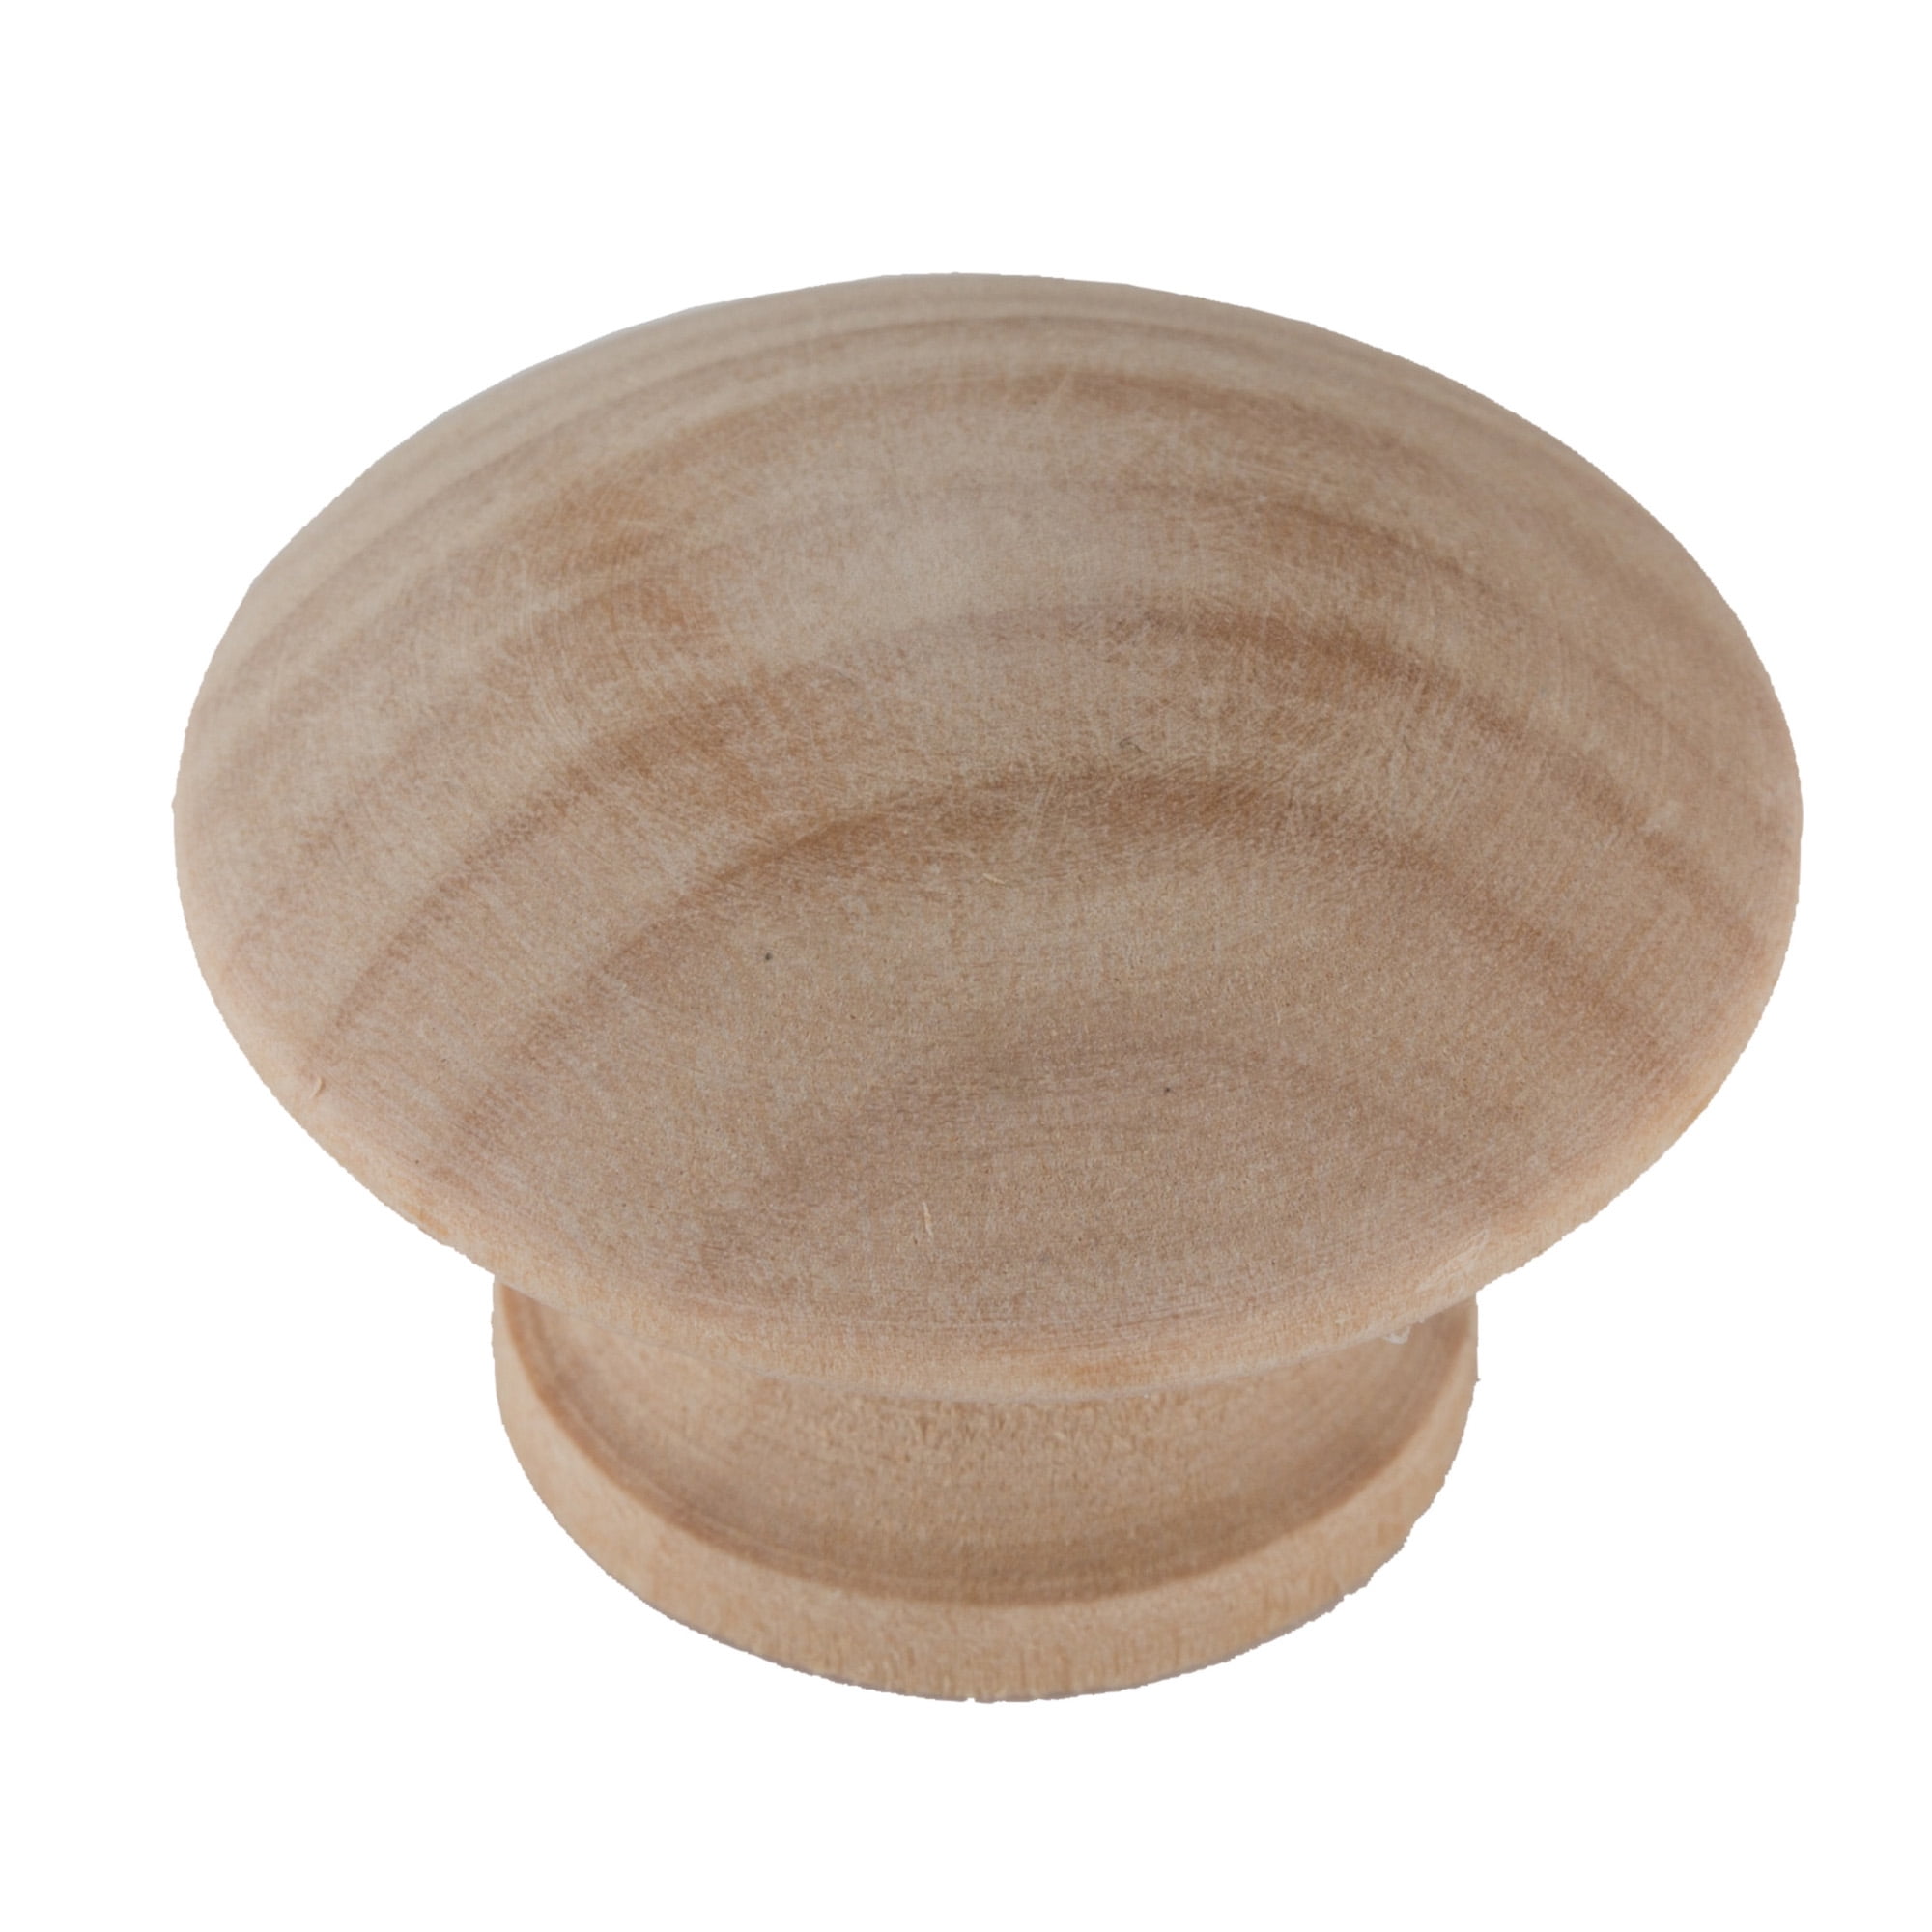 Drawer Pull Knobs 1-3/4 inch Diameter Pack of 8 Maple Round Mushroom Shape Wooden Cabinet Knobs